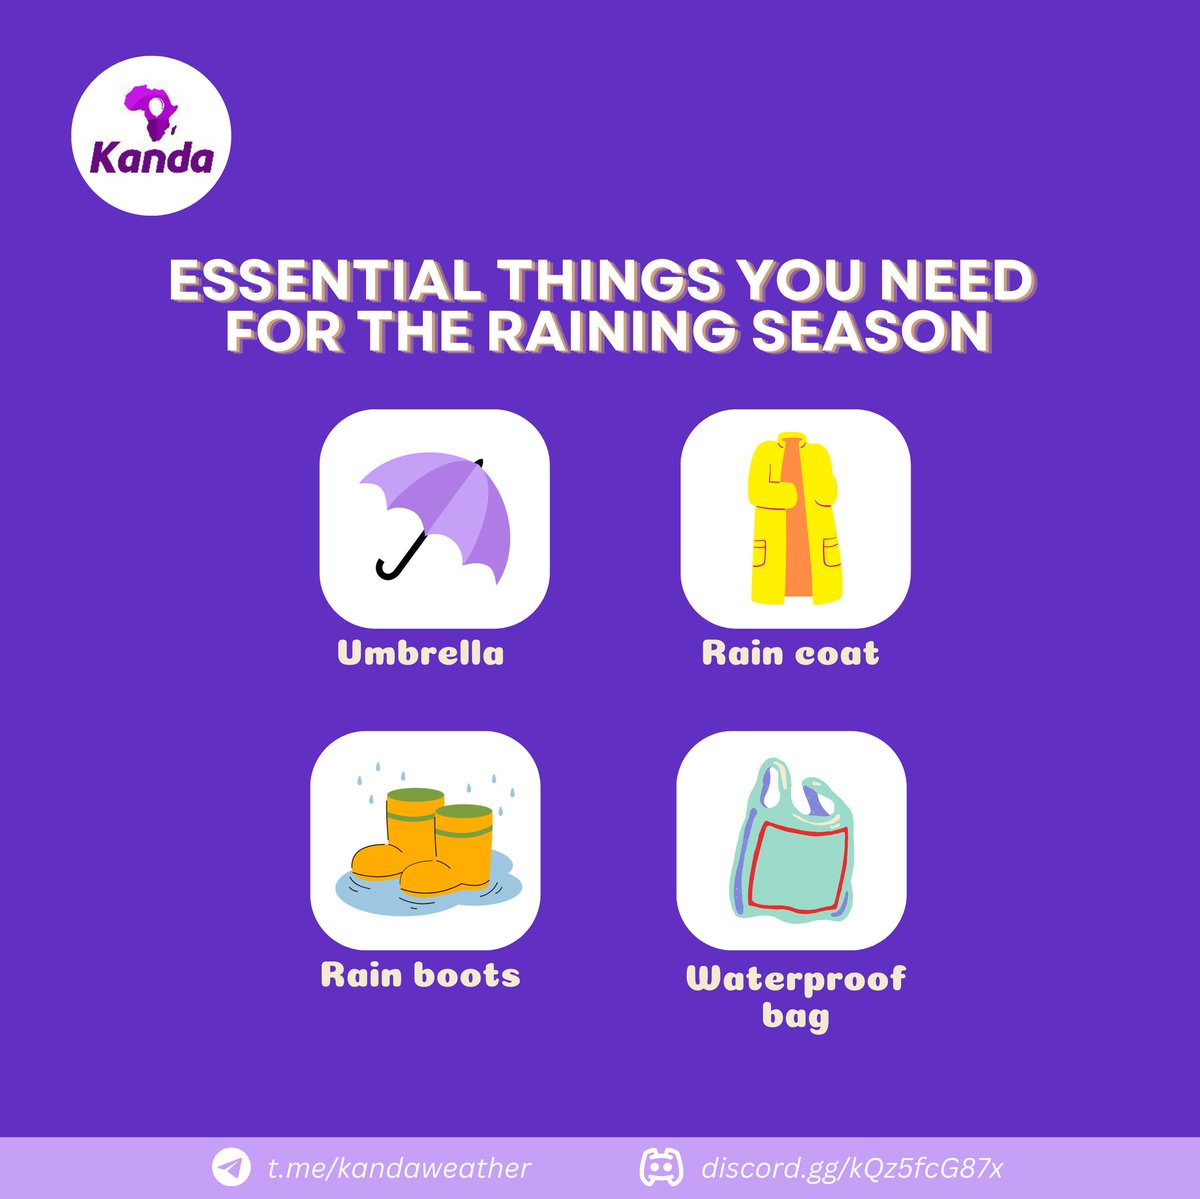 Rainy season essentials checklist: waterproof bag to store anti-rain devices, rain boots for safety, umbrella, and a raincoat for staying dry. What's your favorite must-have for the rainy season? #RainySeasonEssentials #StayDry #KandaWeather